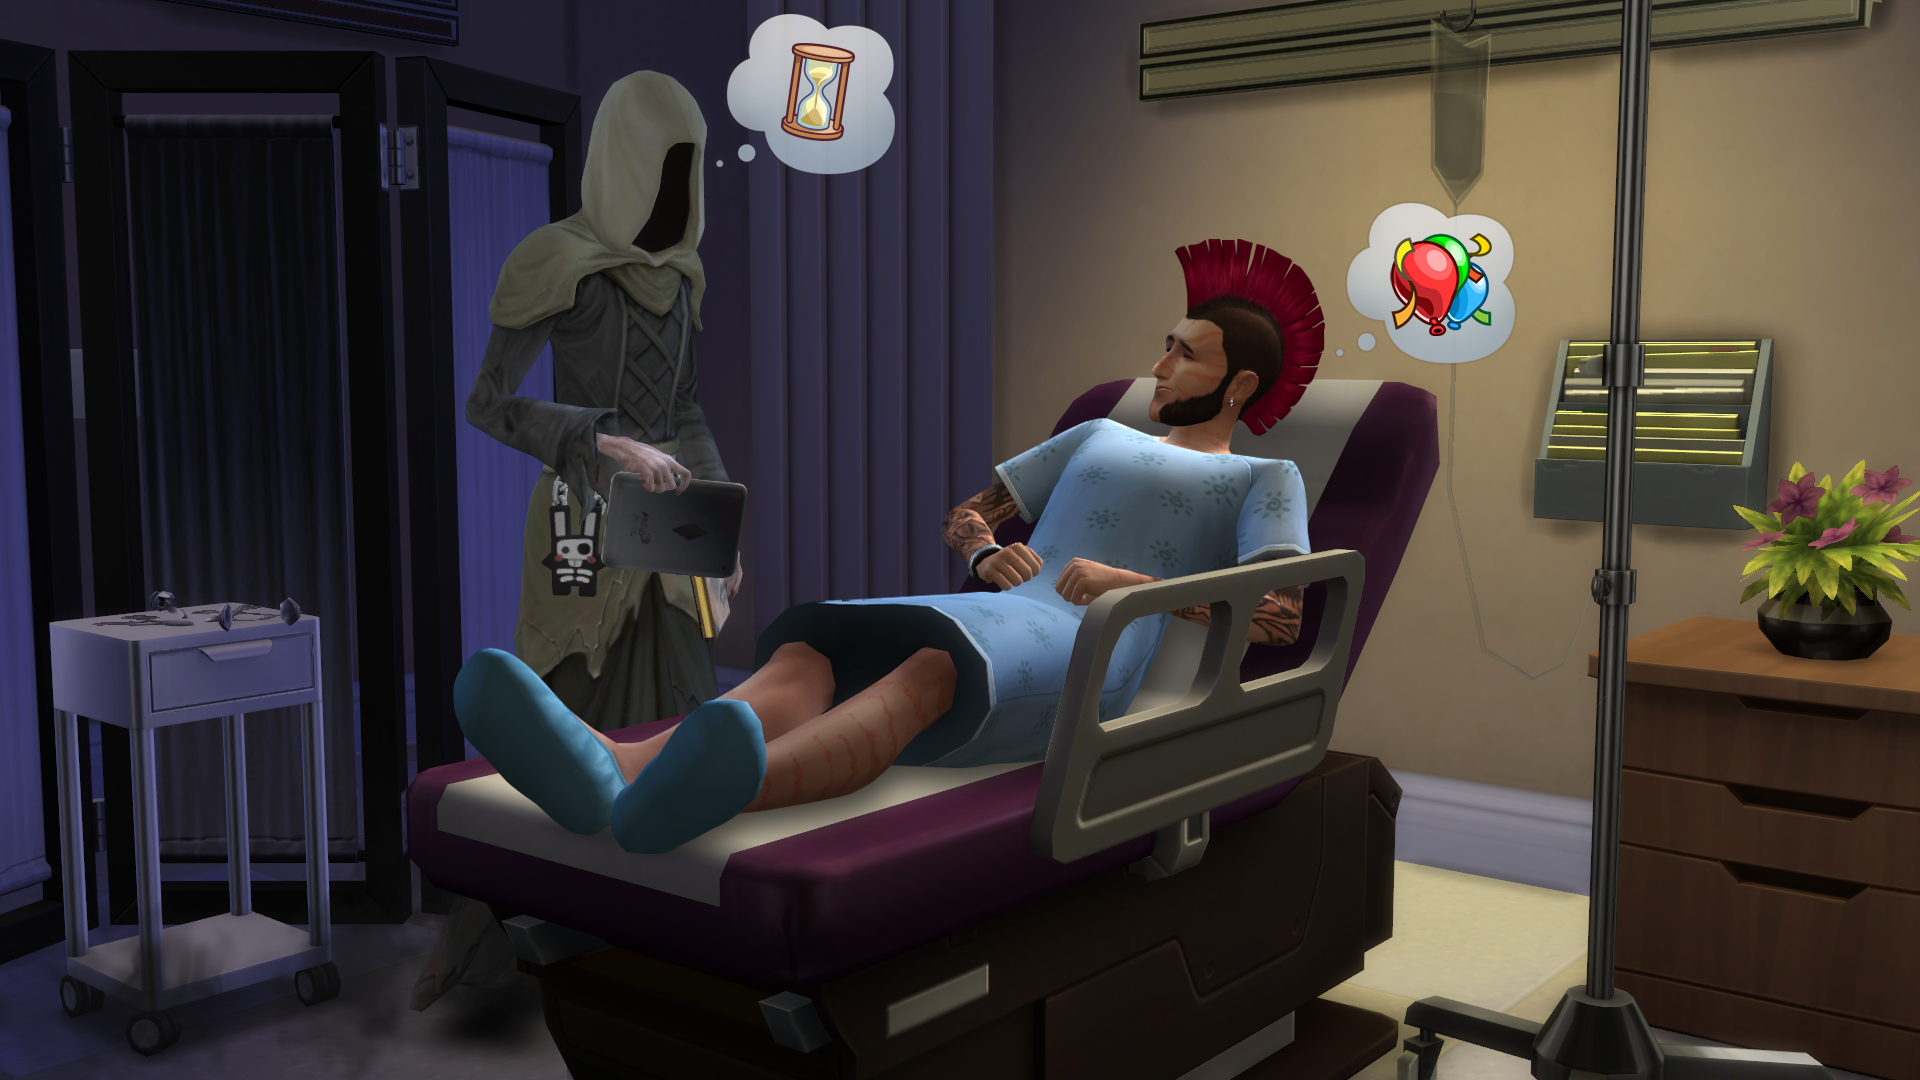 Image for This Sims 4 bug is aging characters at an alarming rate